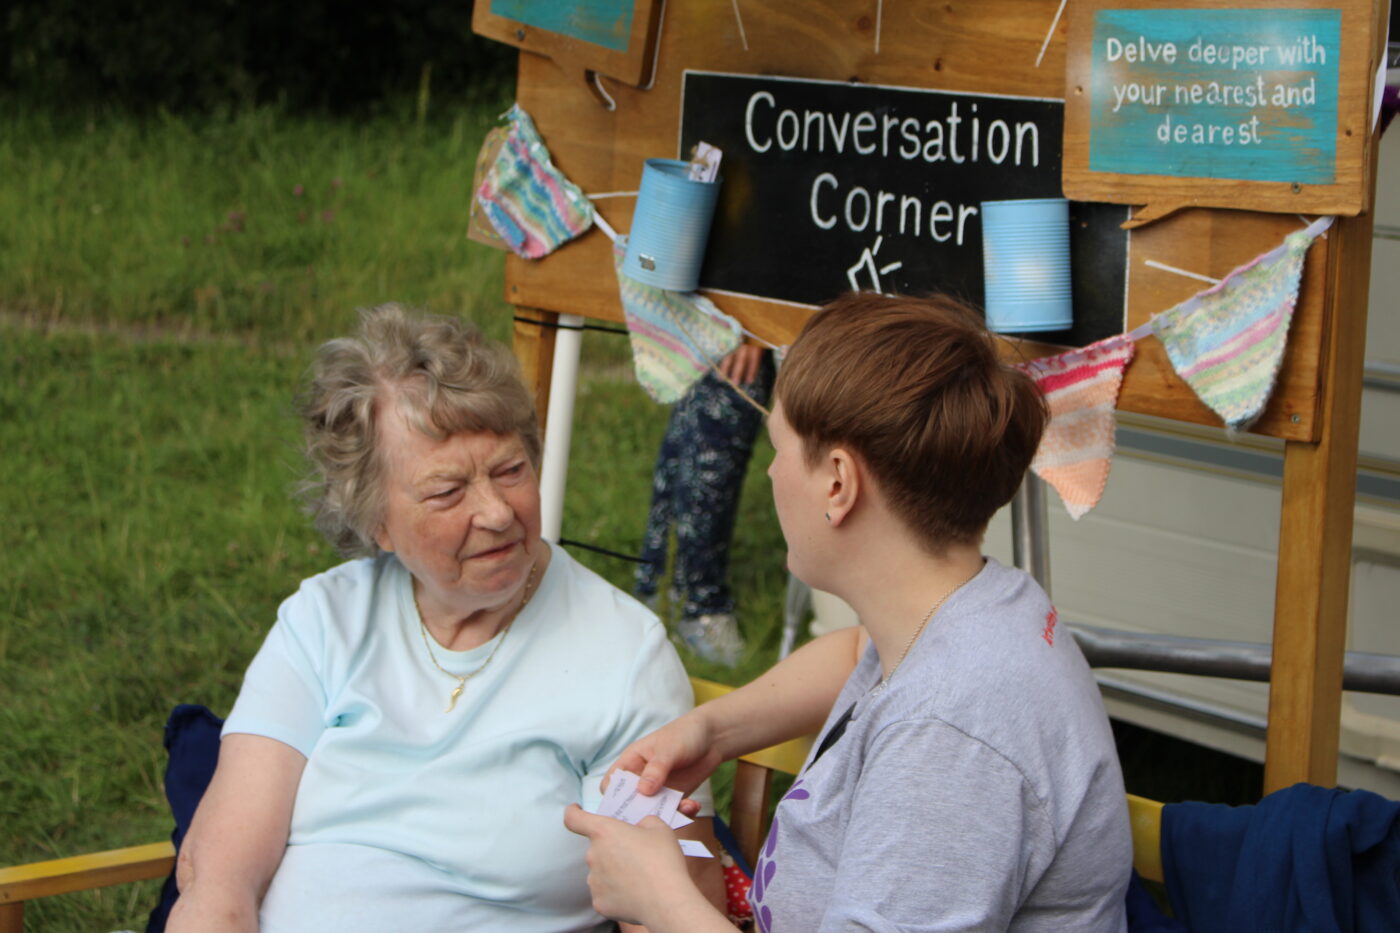 Rachel sits on a bench chatting to an older person sitting next to them. A sign above their heads reads Conversation Corner.